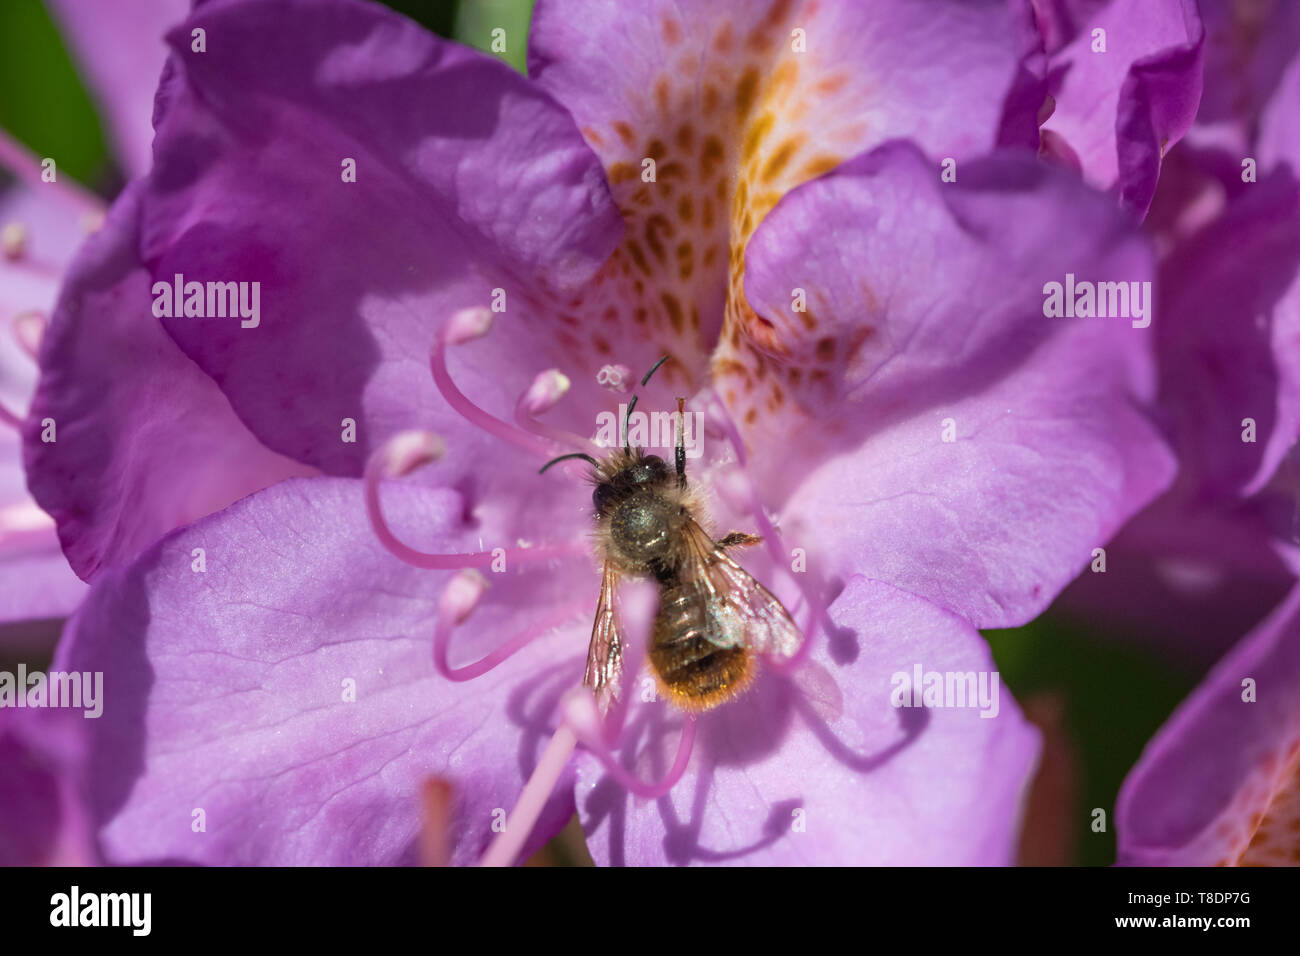 Solitary bee on rhododendron flower Stock Photo